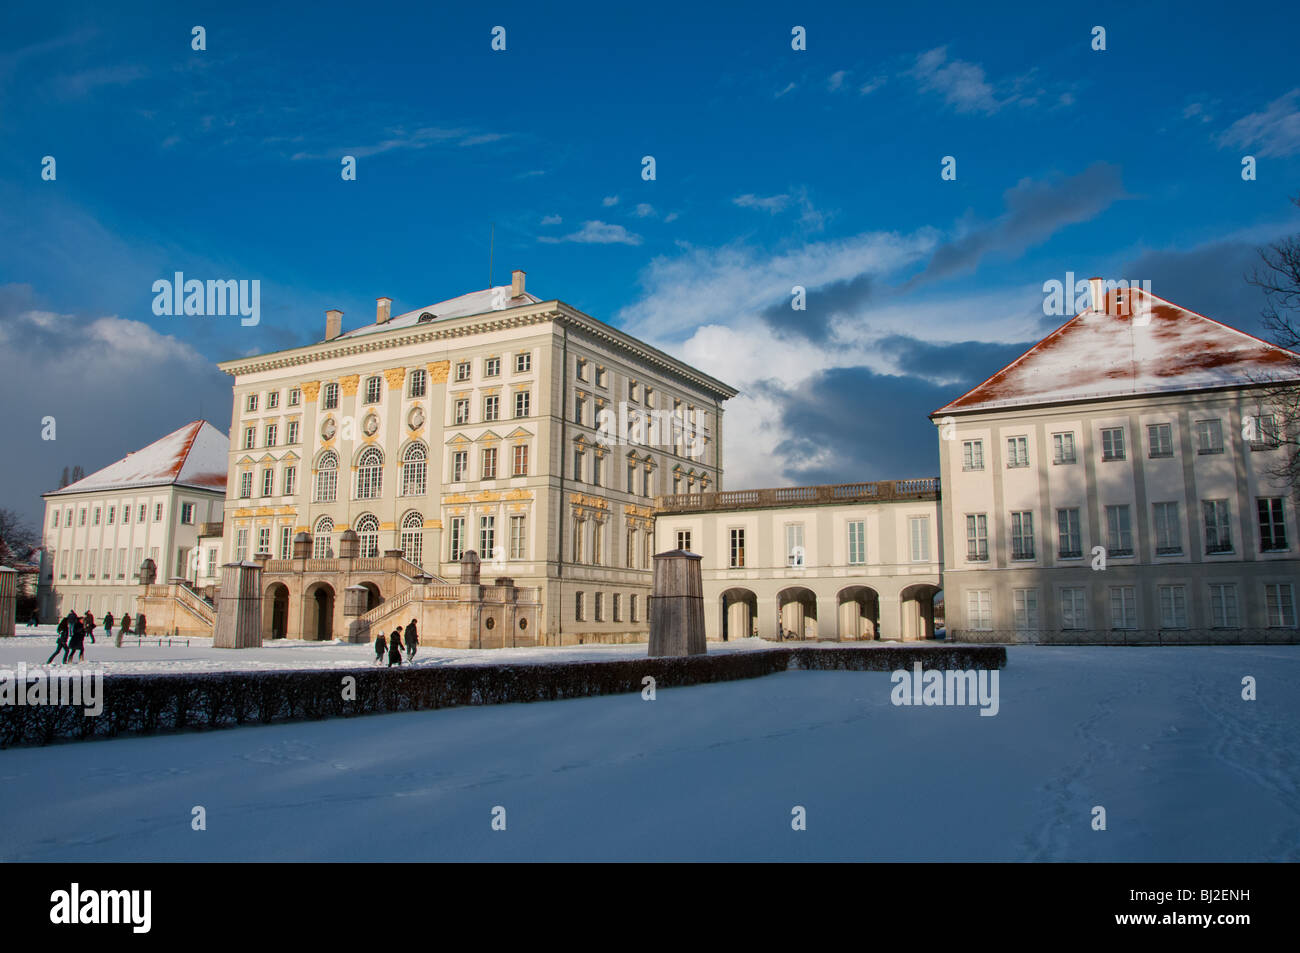 Nymphenburg palace in winter snow. Munich, Germany Stock Photo